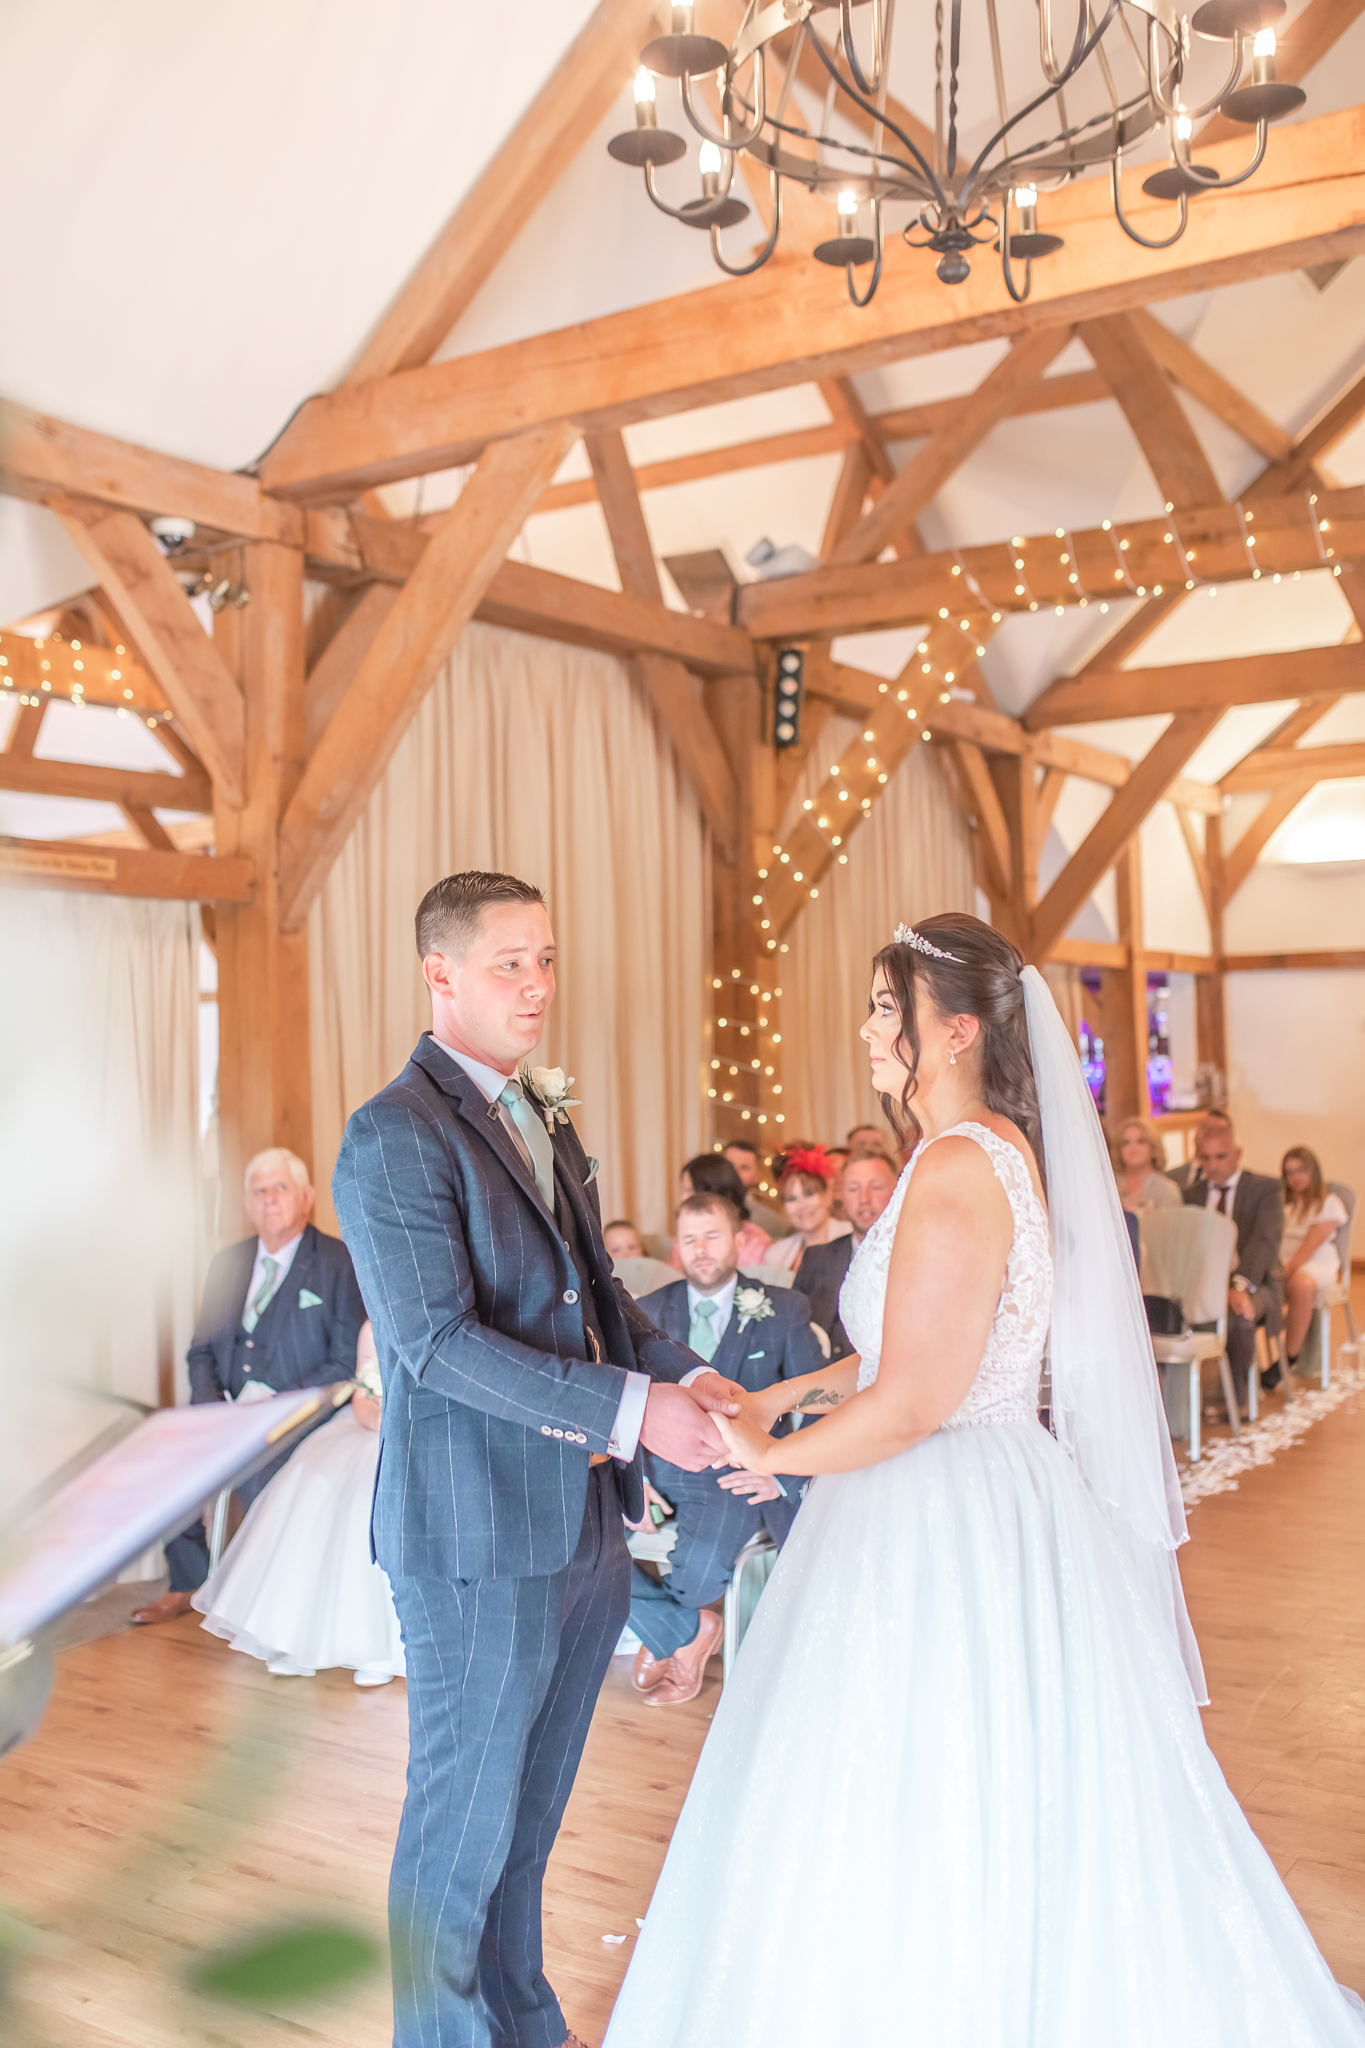 Aimee and Ant facing each other during their wedding ceremony in Cheshire